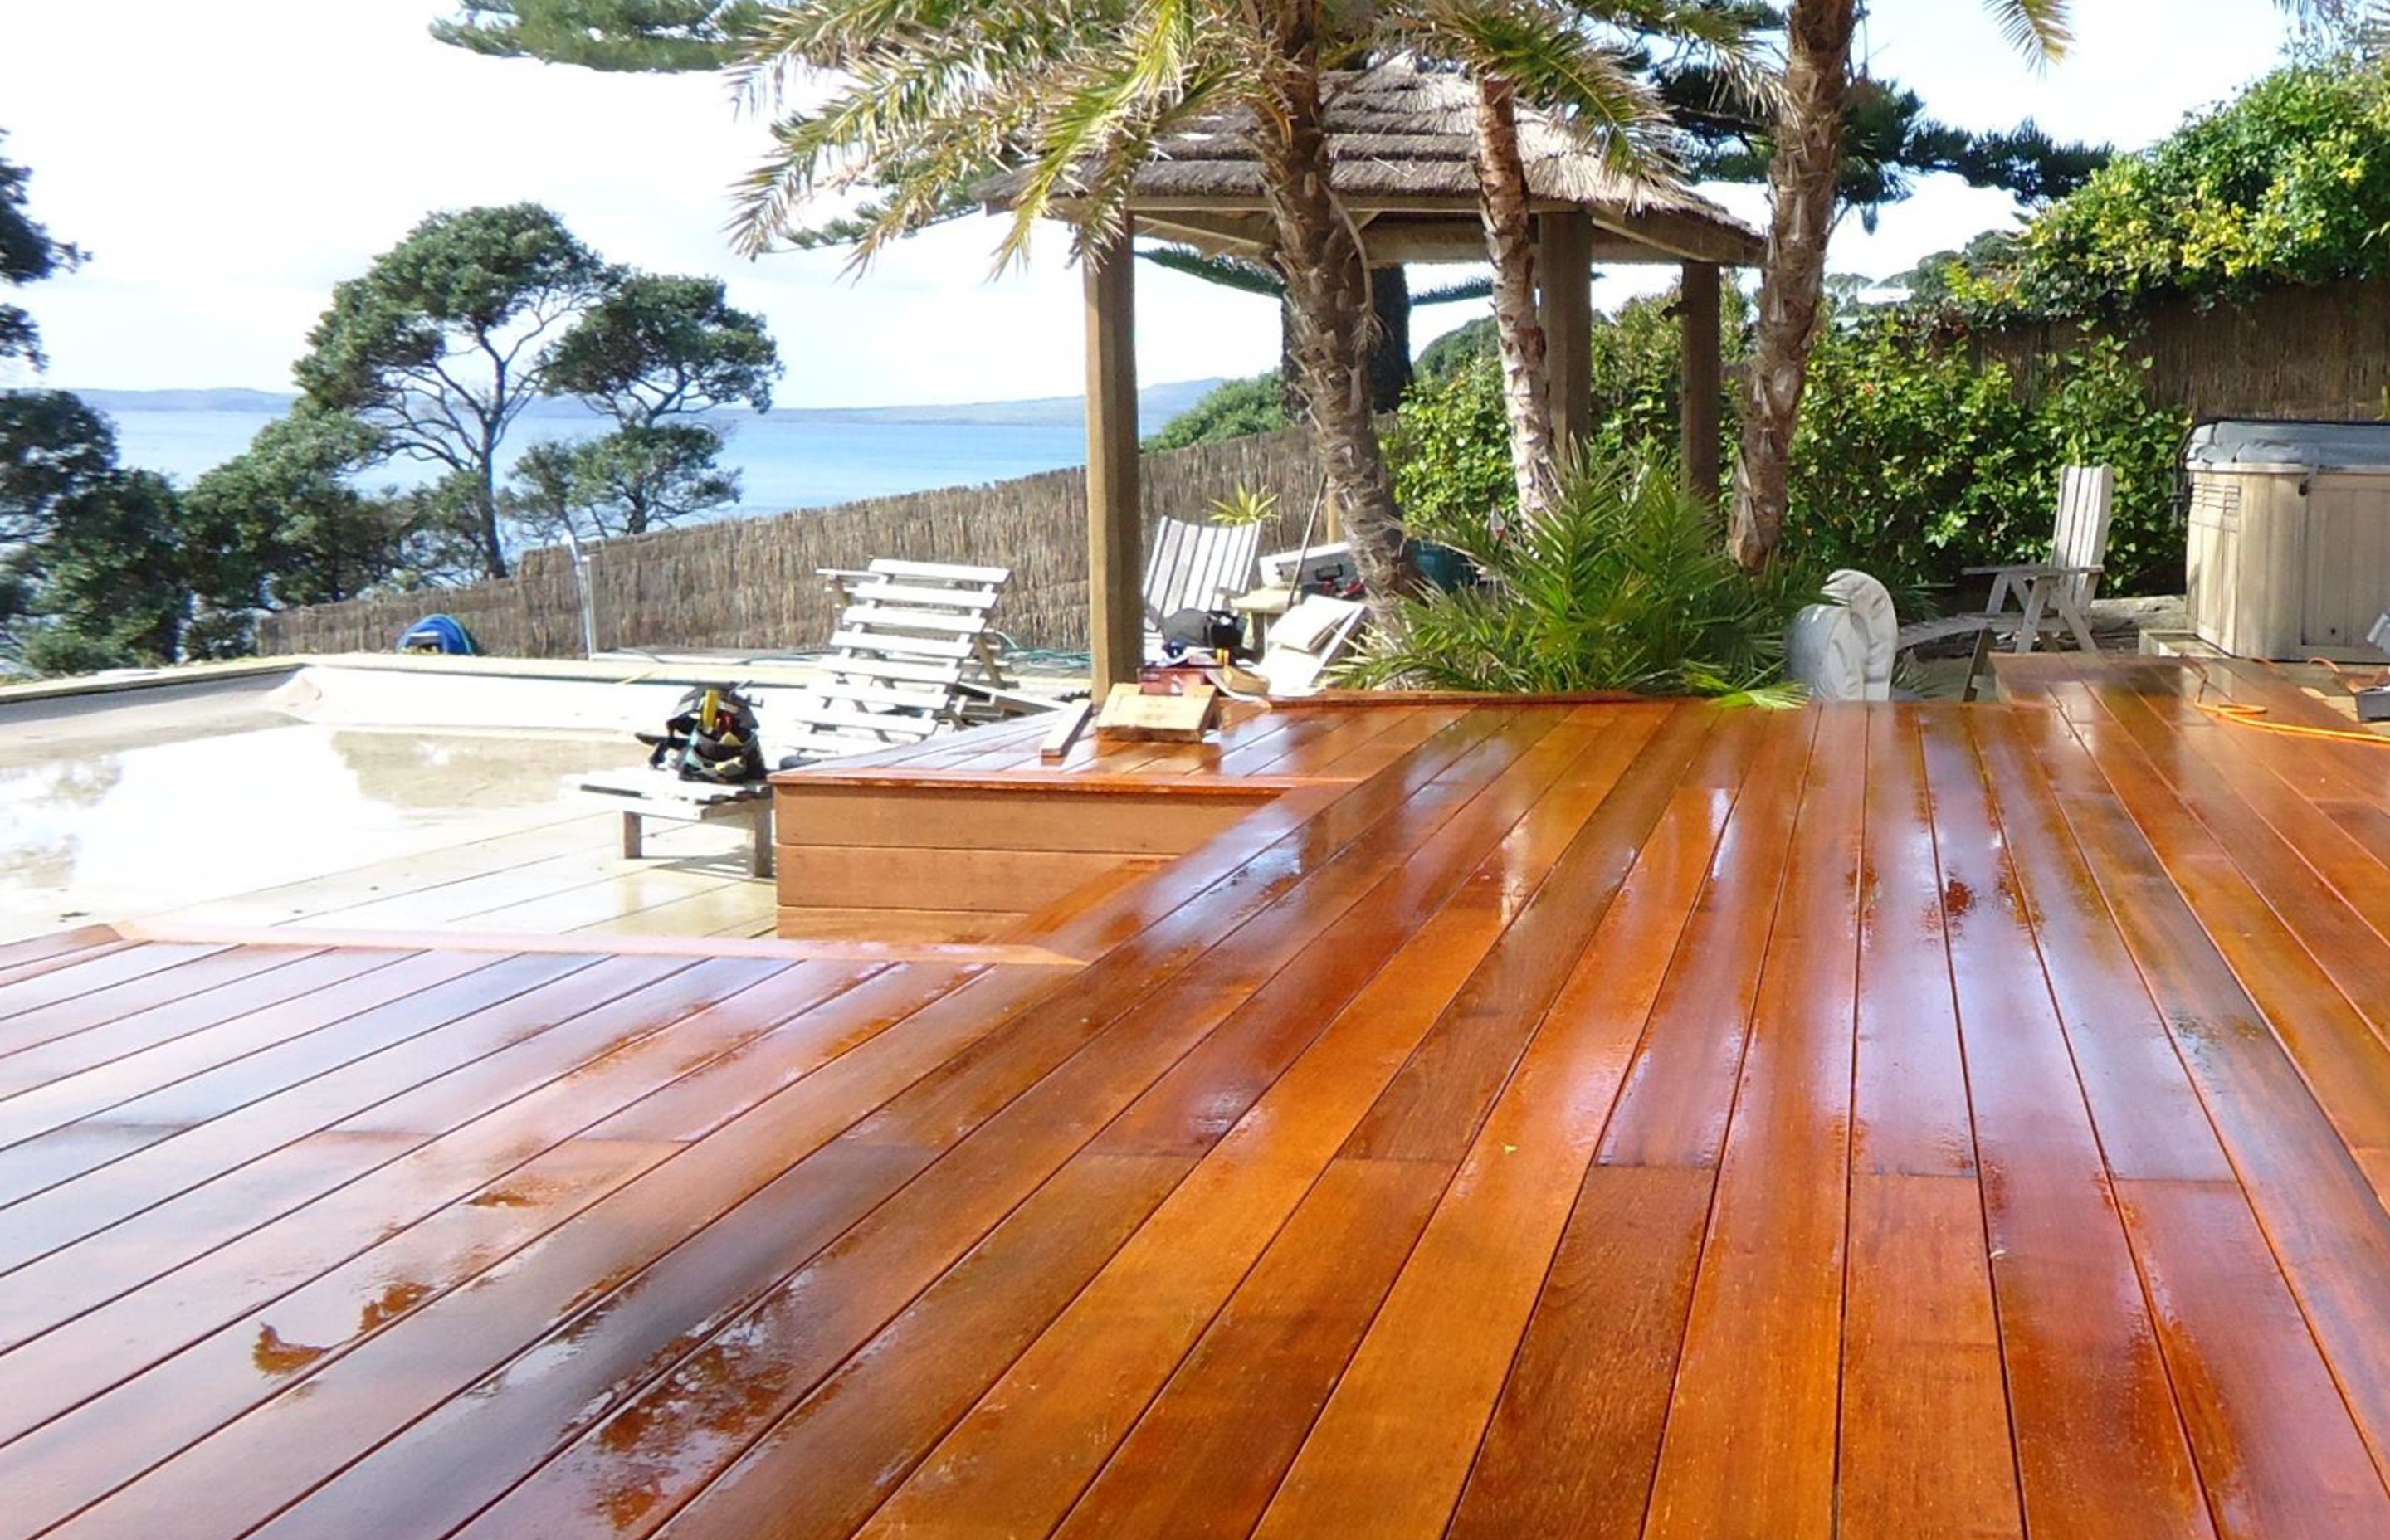 A hidden deck fastener system helps improve the aesthetics of a timber deck.